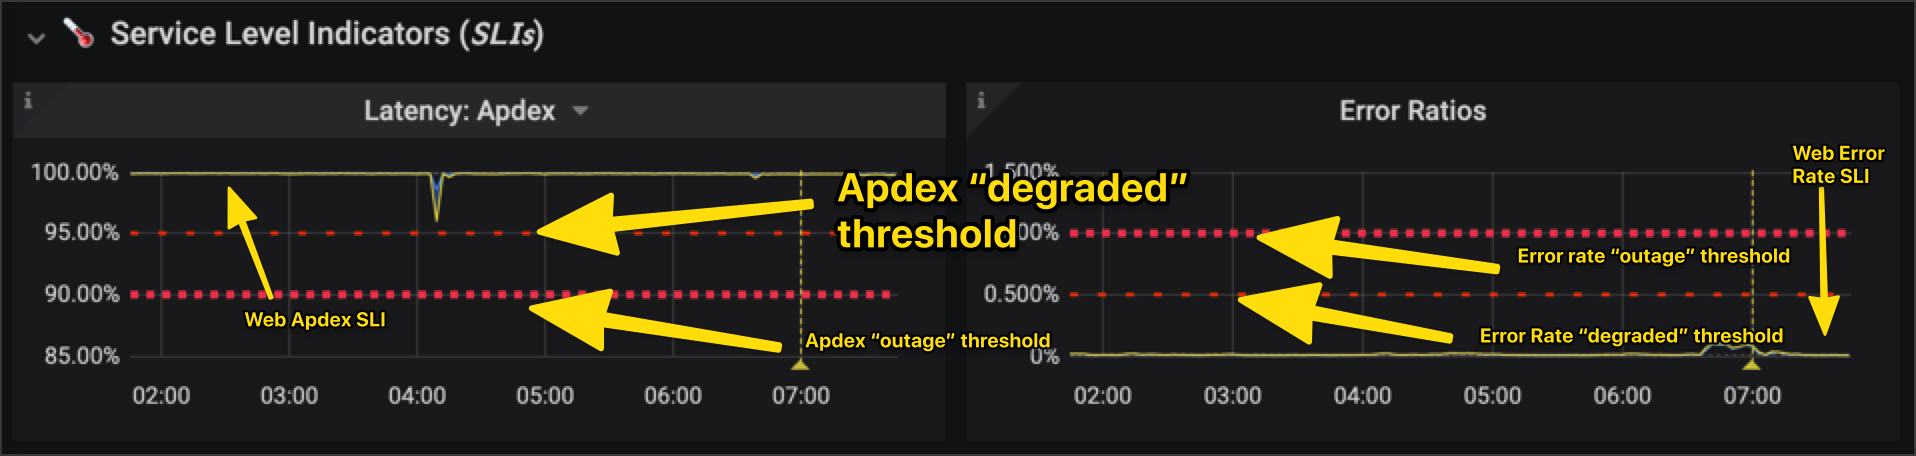 degraded and outage